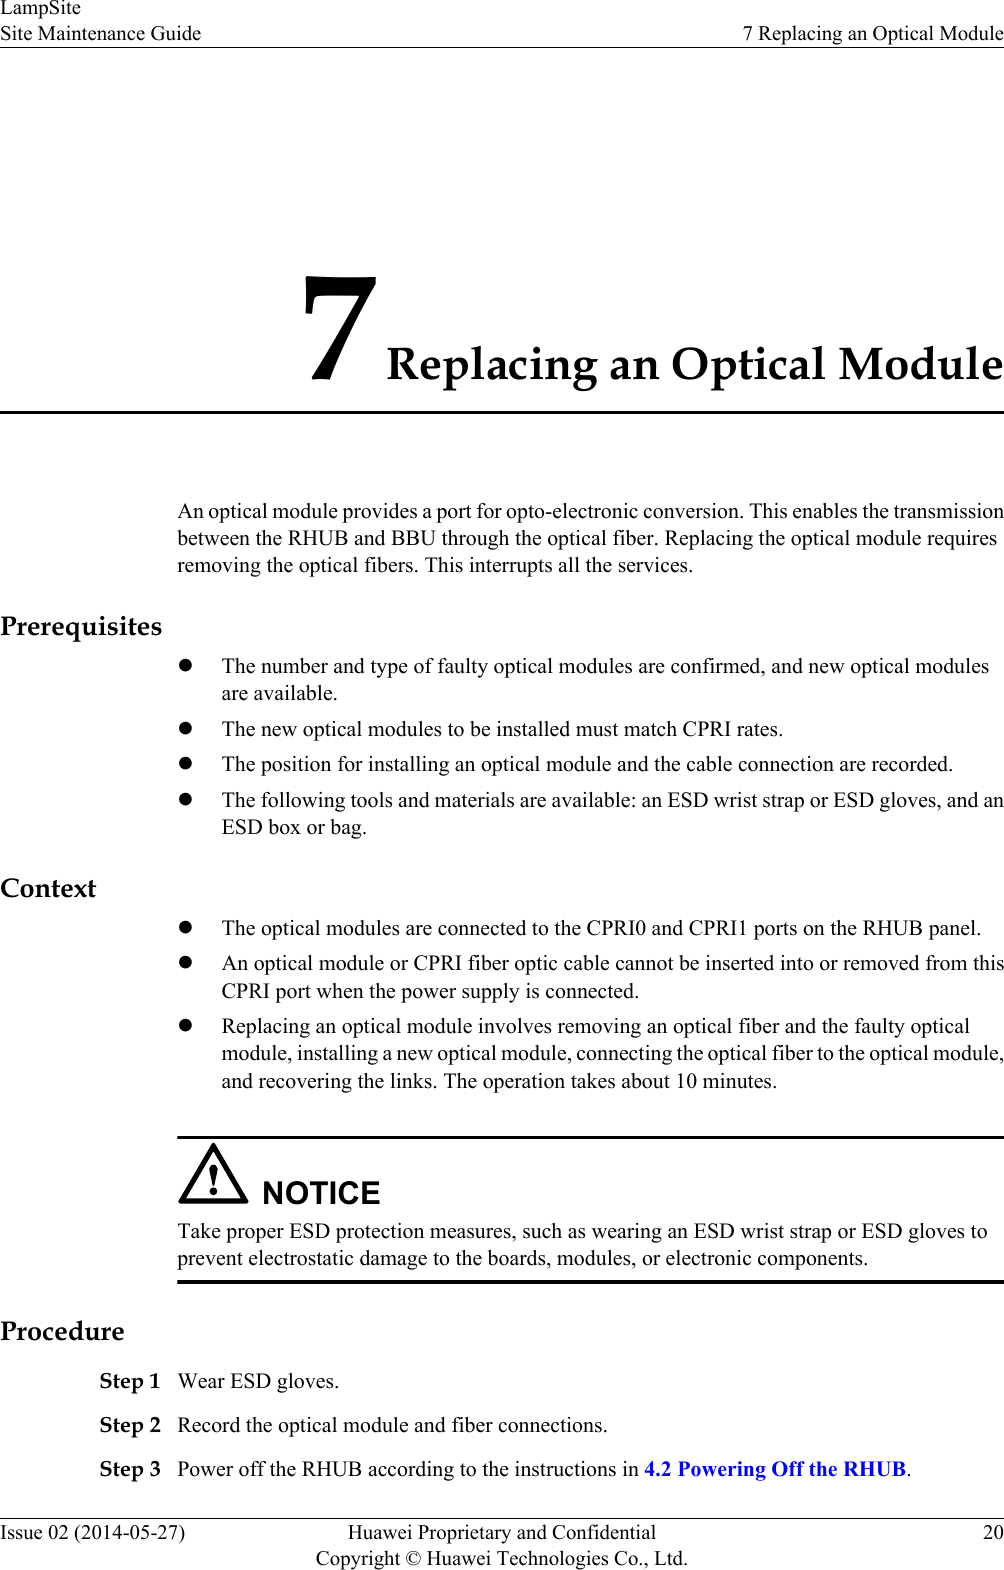 7 Replacing an Optical ModuleAn optical module provides a port for opto-electronic conversion. This enables the transmissionbetween the RHUB and BBU through the optical fiber. Replacing the optical module requiresremoving the optical fibers. This interrupts all the services.PrerequisiteslThe number and type of faulty optical modules are confirmed, and new optical modulesare available.lThe new optical modules to be installed must match CPRI rates.lThe position for installing an optical module and the cable connection are recorded.lThe following tools and materials are available: an ESD wrist strap or ESD gloves, and anESD box or bag.ContextlThe optical modules are connected to the CPRI0 and CPRI1 ports on the RHUB panel.lAn optical module or CPRI fiber optic cable cannot be inserted into or removed from thisCPRI port when the power supply is connected.lReplacing an optical module involves removing an optical fiber and the faulty opticalmodule, installing a new optical module, connecting the optical fiber to the optical module,and recovering the links. The operation takes about 10 minutes.NOTICETake proper ESD protection measures, such as wearing an ESD wrist strap or ESD gloves toprevent electrostatic damage to the boards, modules, or electronic components.ProcedureStep 1 Wear ESD gloves.Step 2 Record the optical module and fiber connections.Step 3 Power off the RHUB according to the instructions in 4.2 Powering Off the RHUB.LampSiteSite Maintenance Guide 7 Replacing an Optical ModuleIssue 02 (2014-05-27) Huawei Proprietary and ConfidentialCopyright © Huawei Technologies Co., Ltd.20